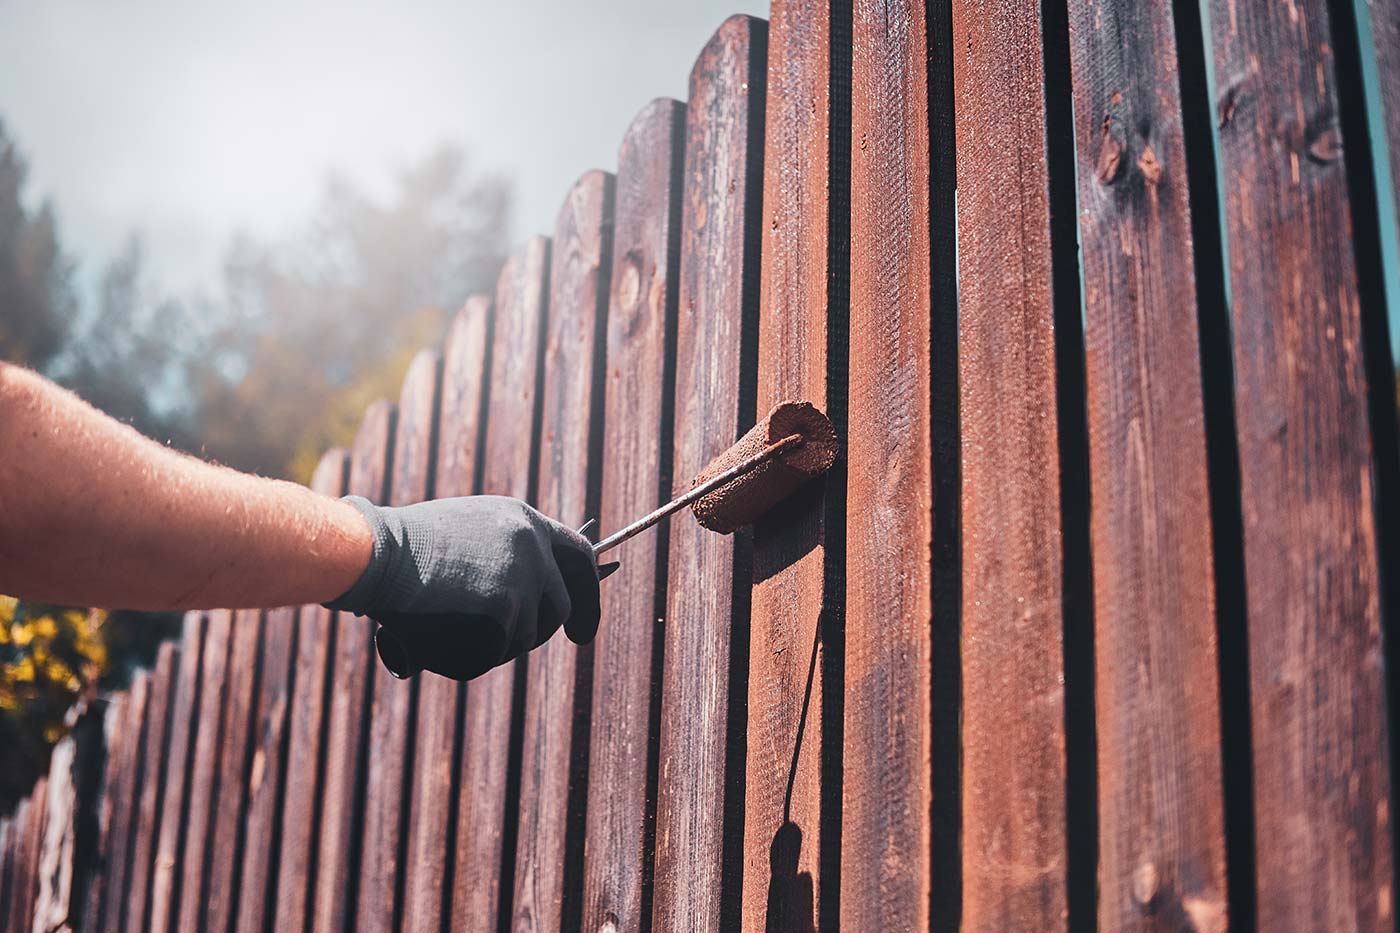 diligent-man-is-painting-fence-with-brush-2021-08-28-11-14-27-utc